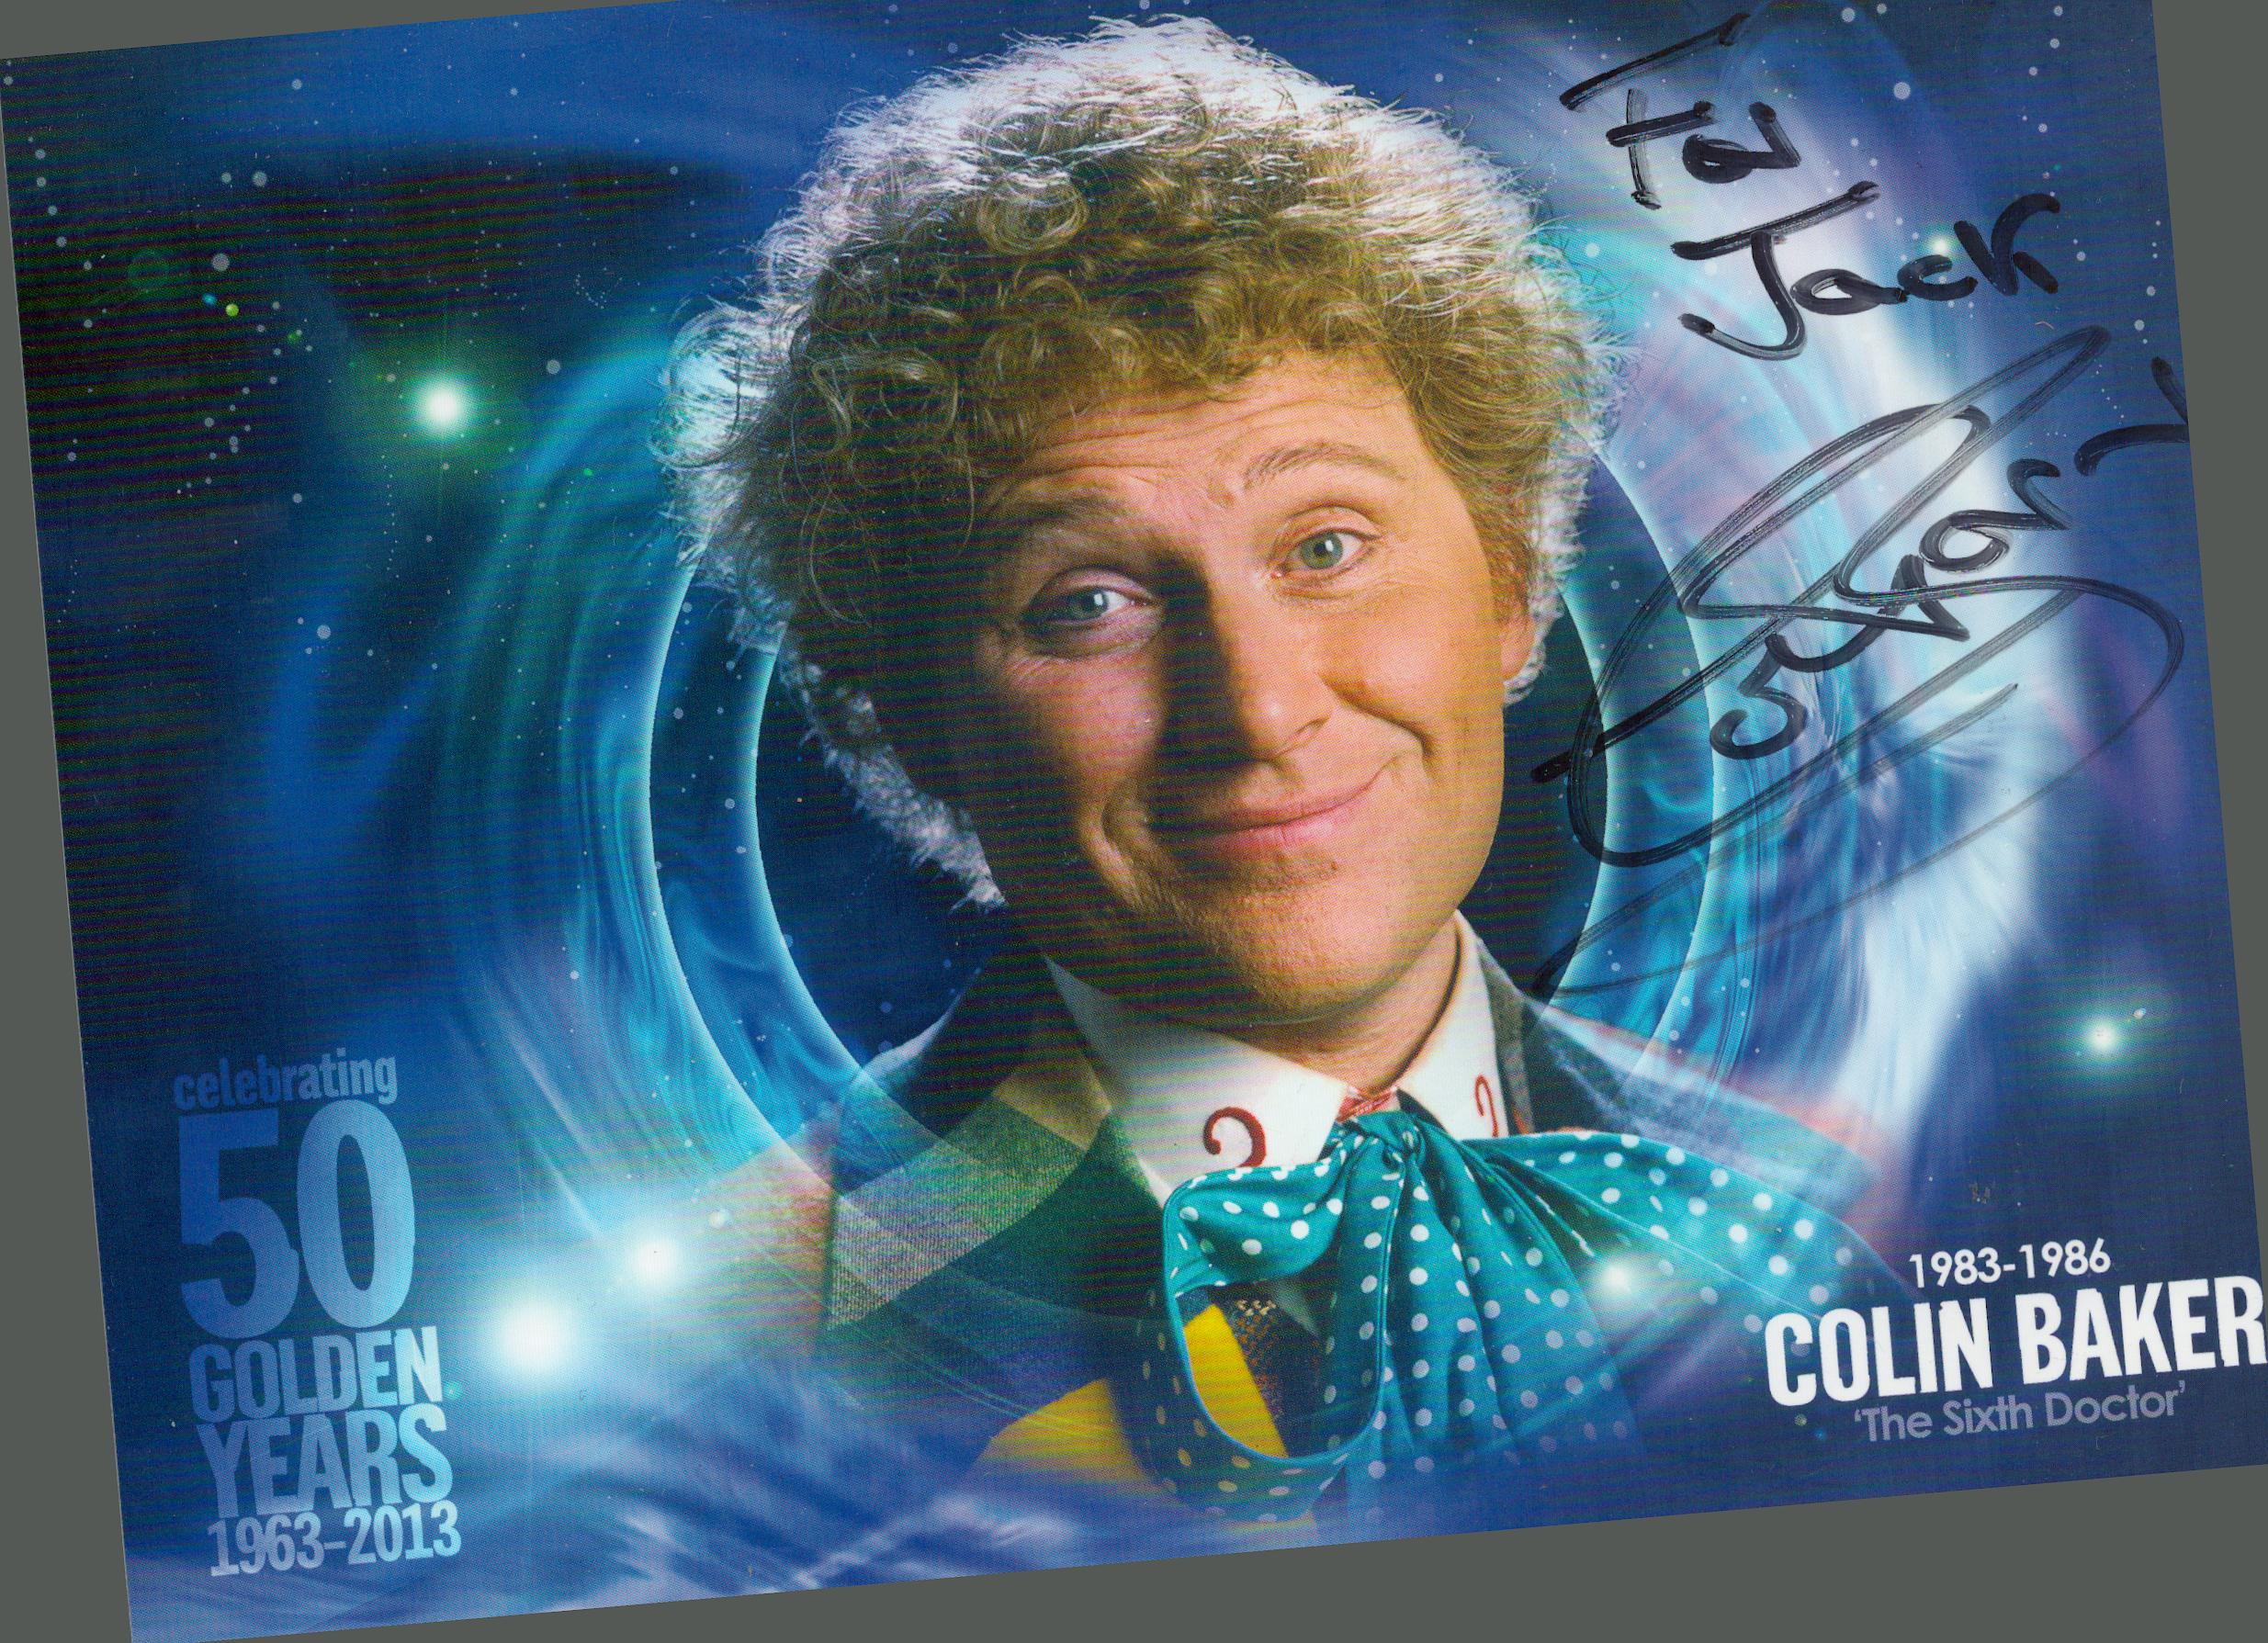 Colin Baker signed 8x6 inch Doctor Who celebrating 50 Golden Years 1963-2013 colour post card